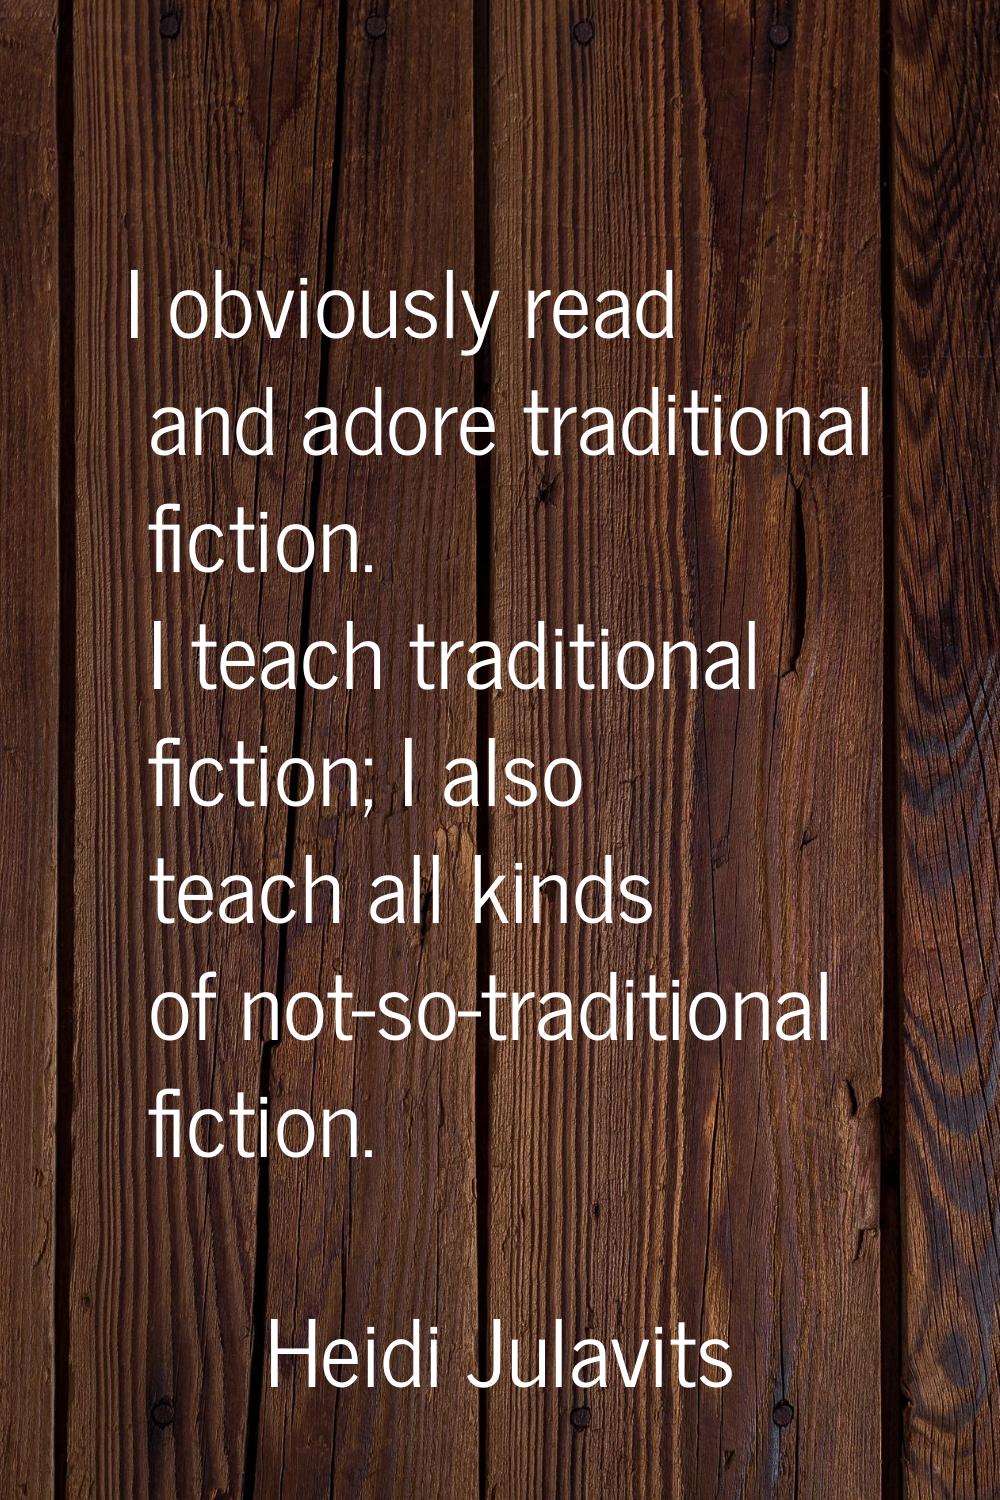 I obviously read and adore traditional fiction. I teach traditional fiction; I also teach all kinds